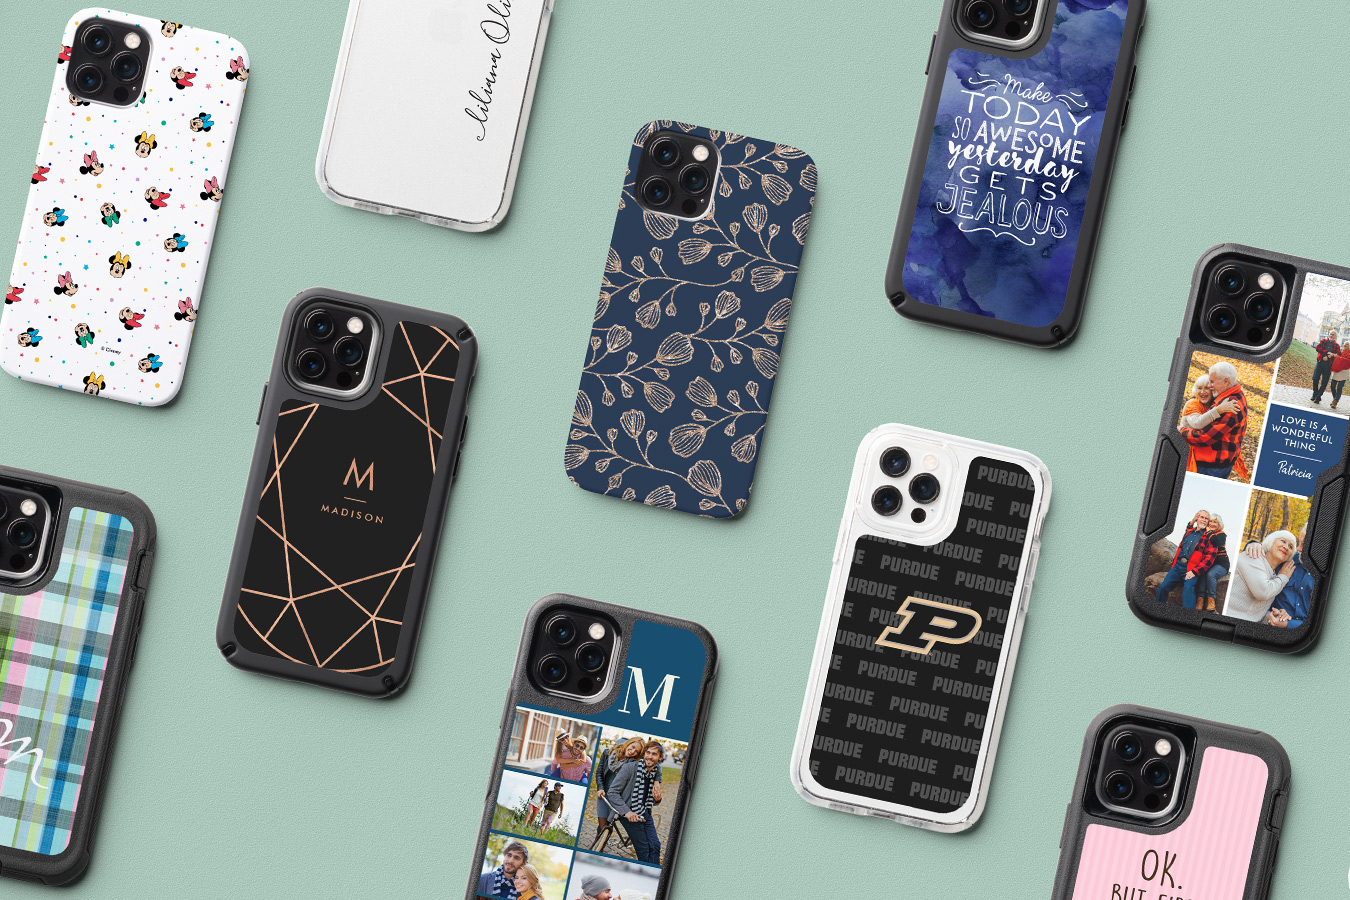 Create your own Phone Case, Zazzle